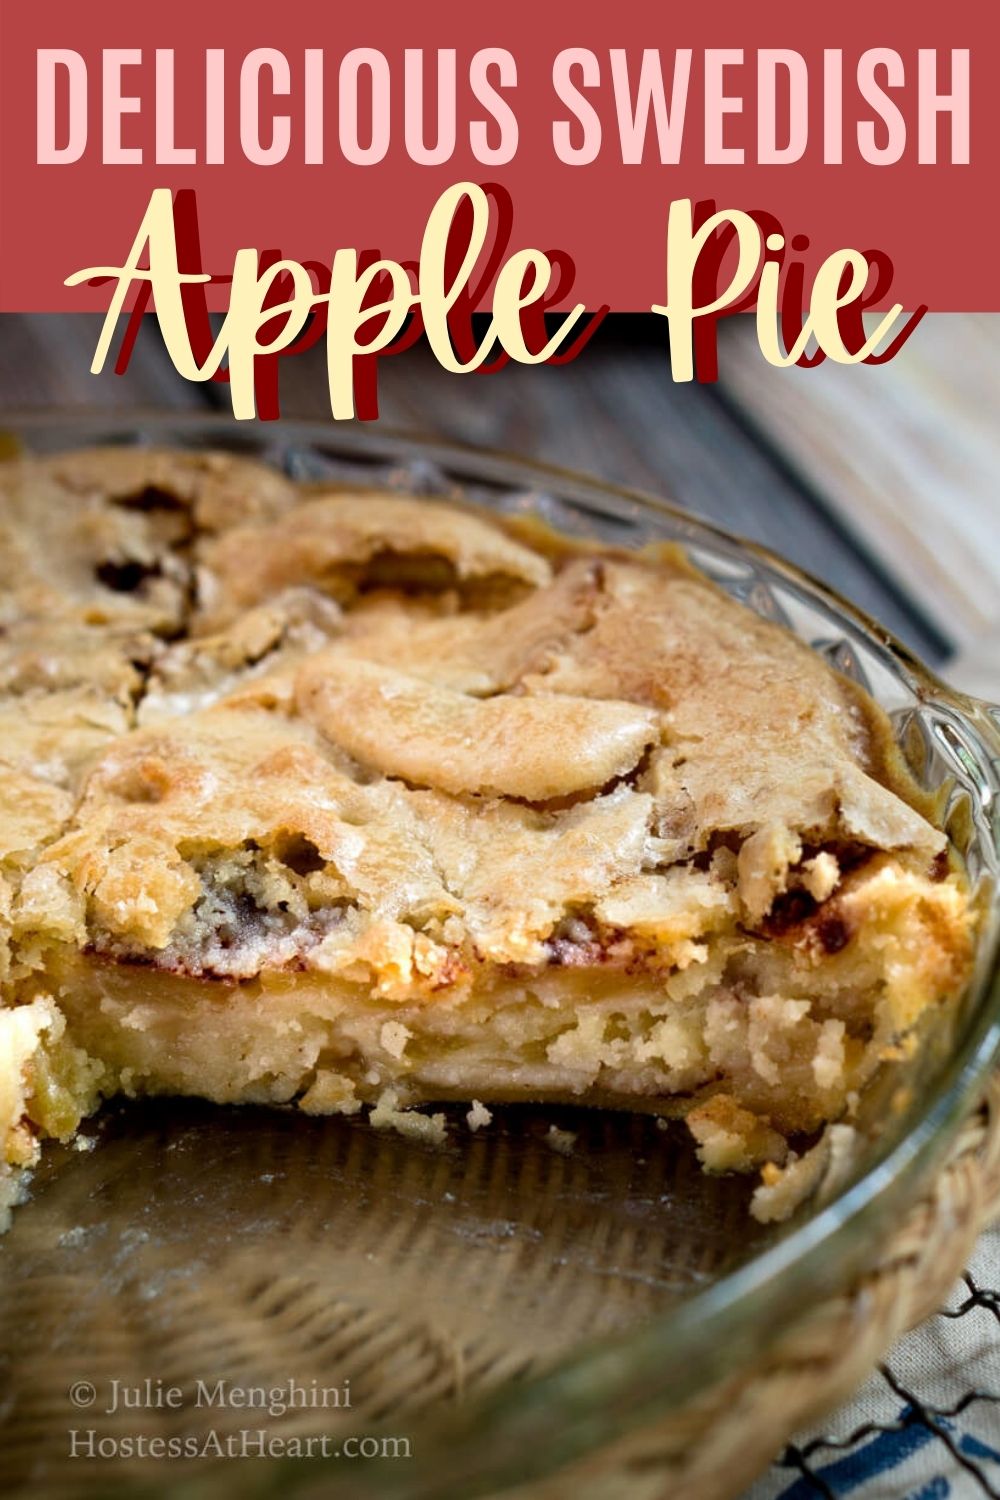 Swedish Apple Pie - The Easiest Pie You'll Ever Make! | Hostess At Heart